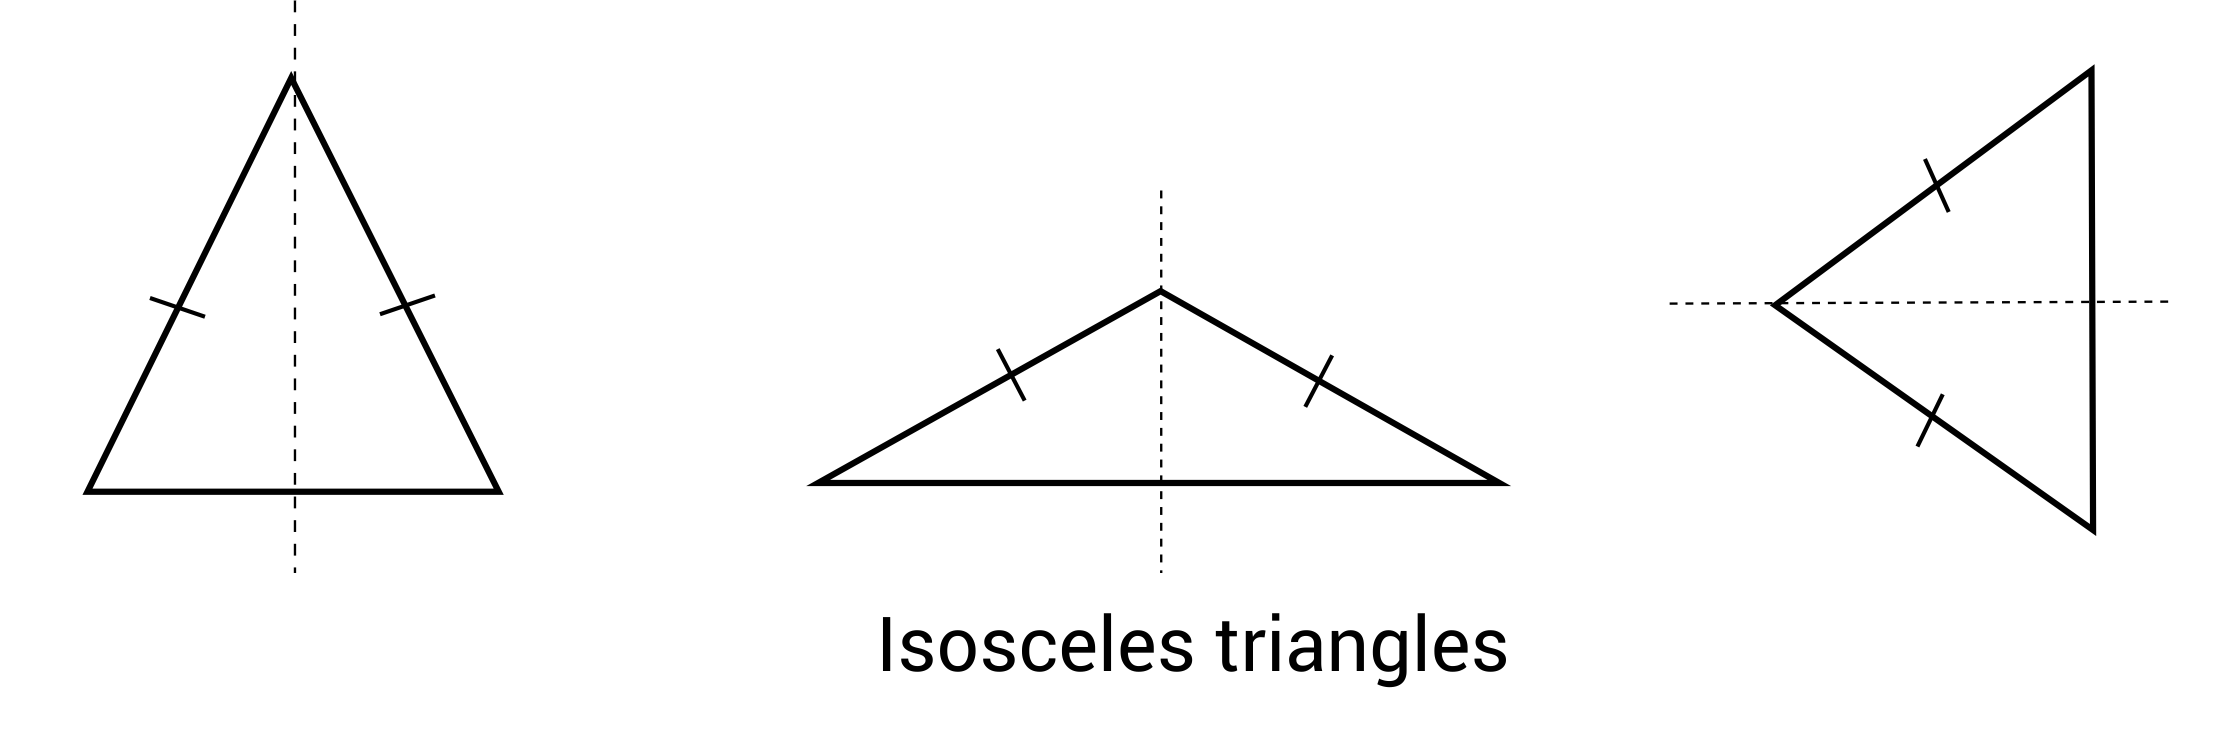 three isoscles triangles with dashed lines in middle displaying symmetry